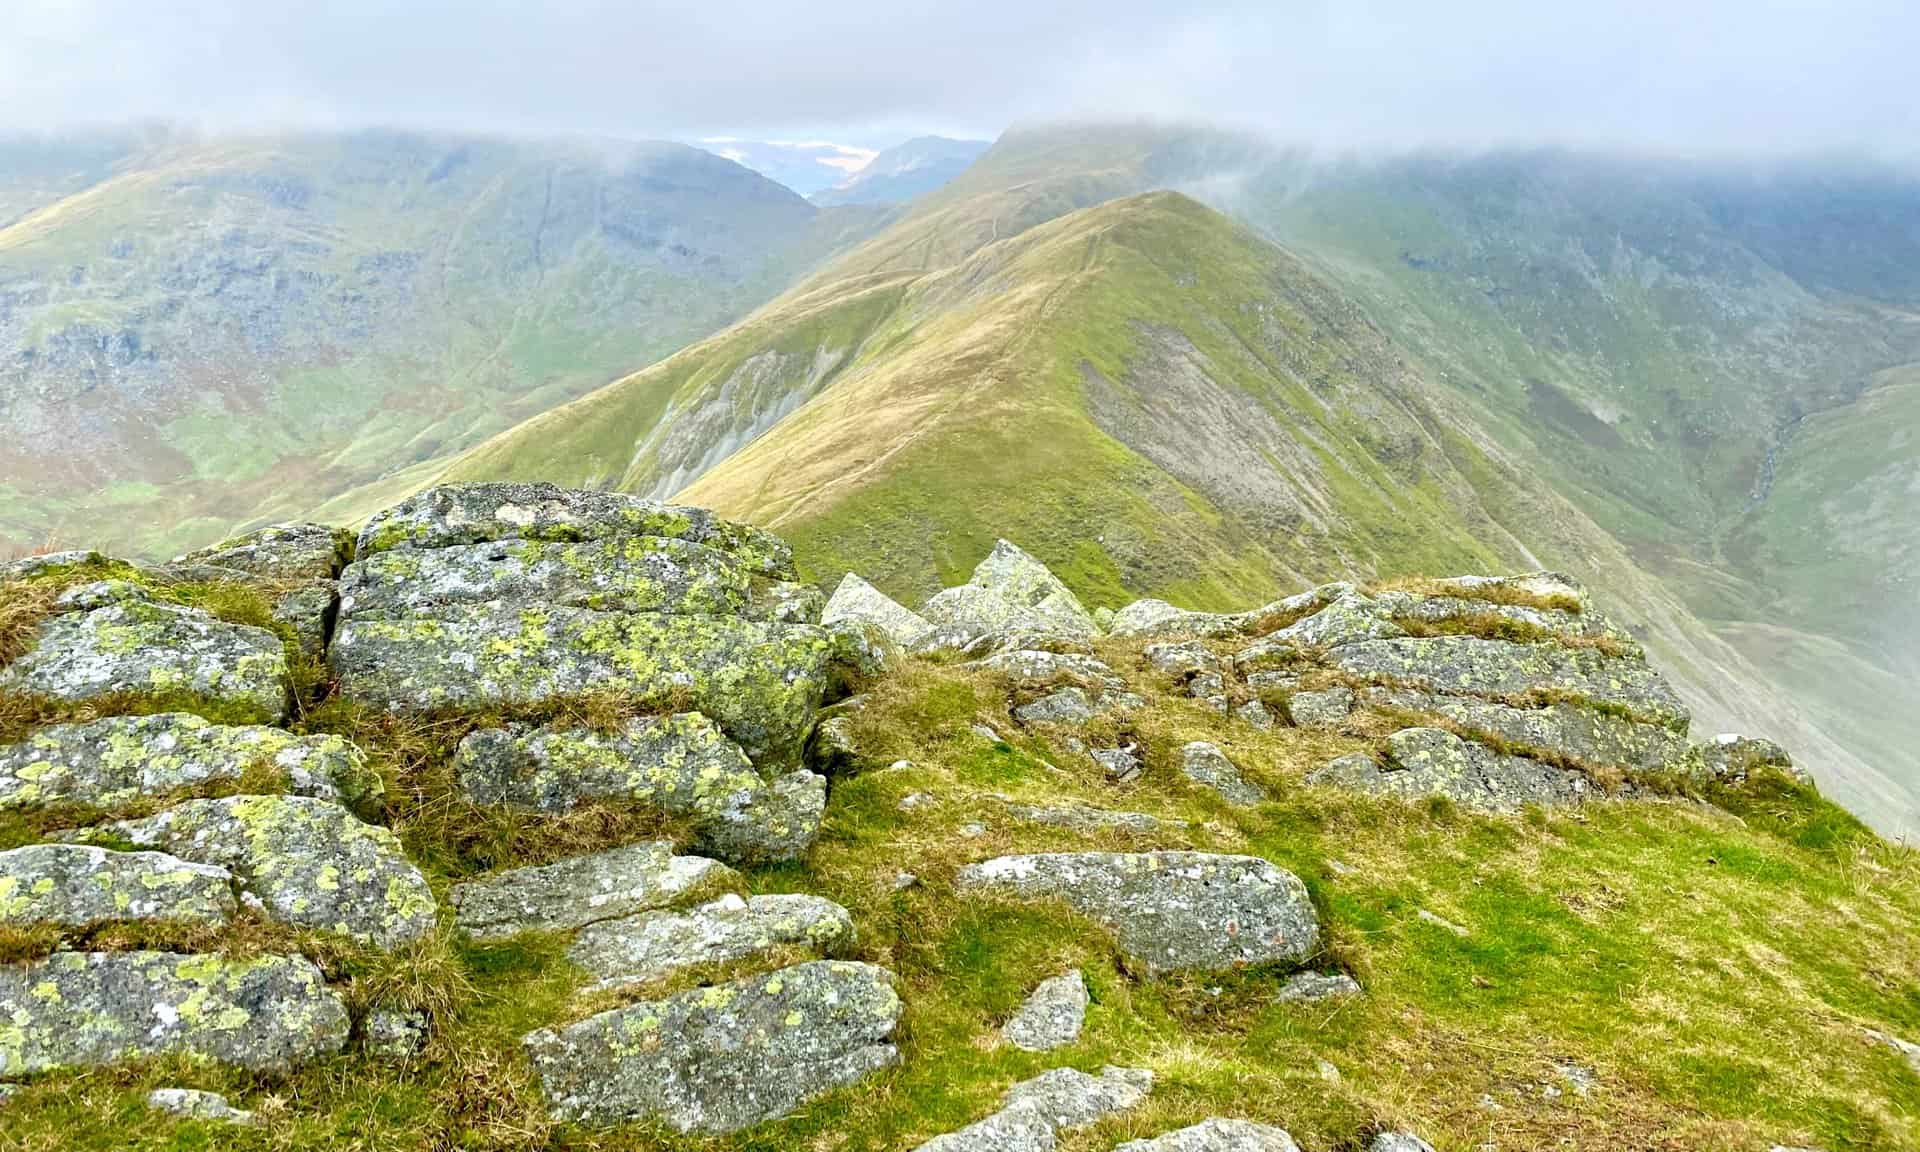 Looking north on the Kentmere Horseshoe from Ill Bell. The path leading to the summit of Froswick is clearly visible.